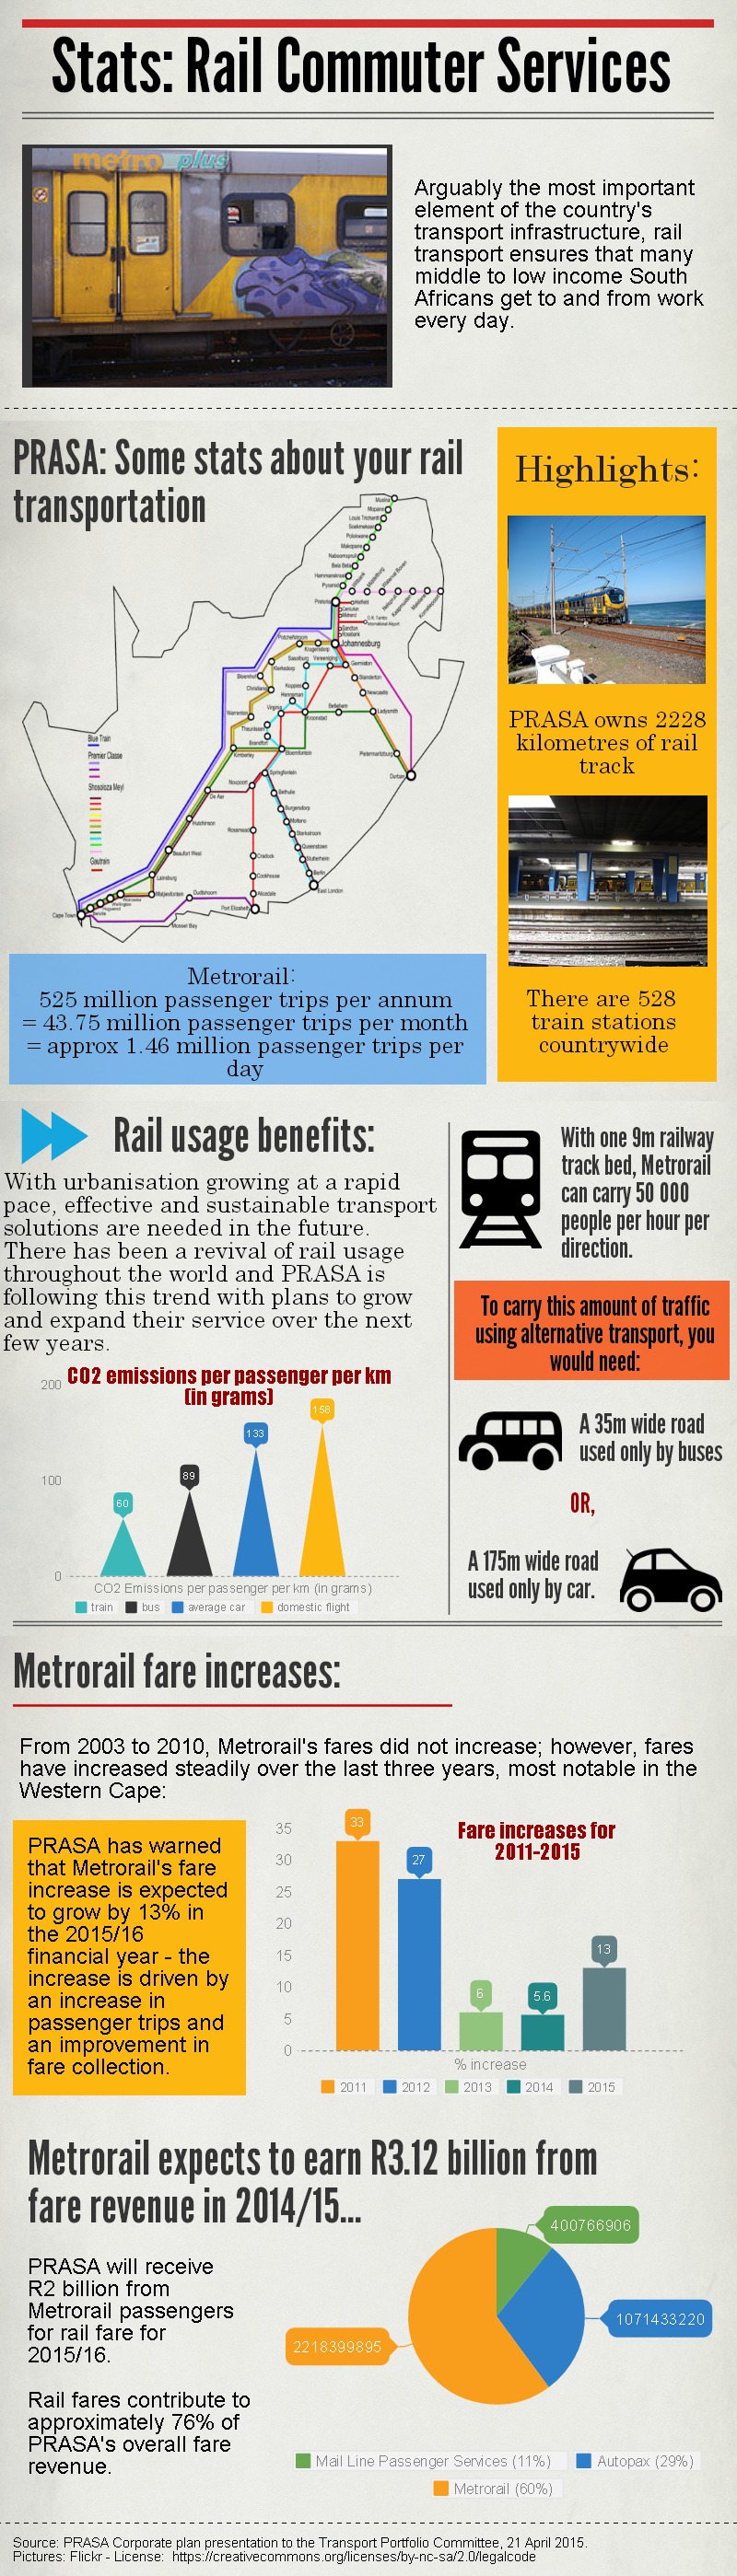 Infographic Rail Usage Benefits And Train Fare Increases In 2015 16